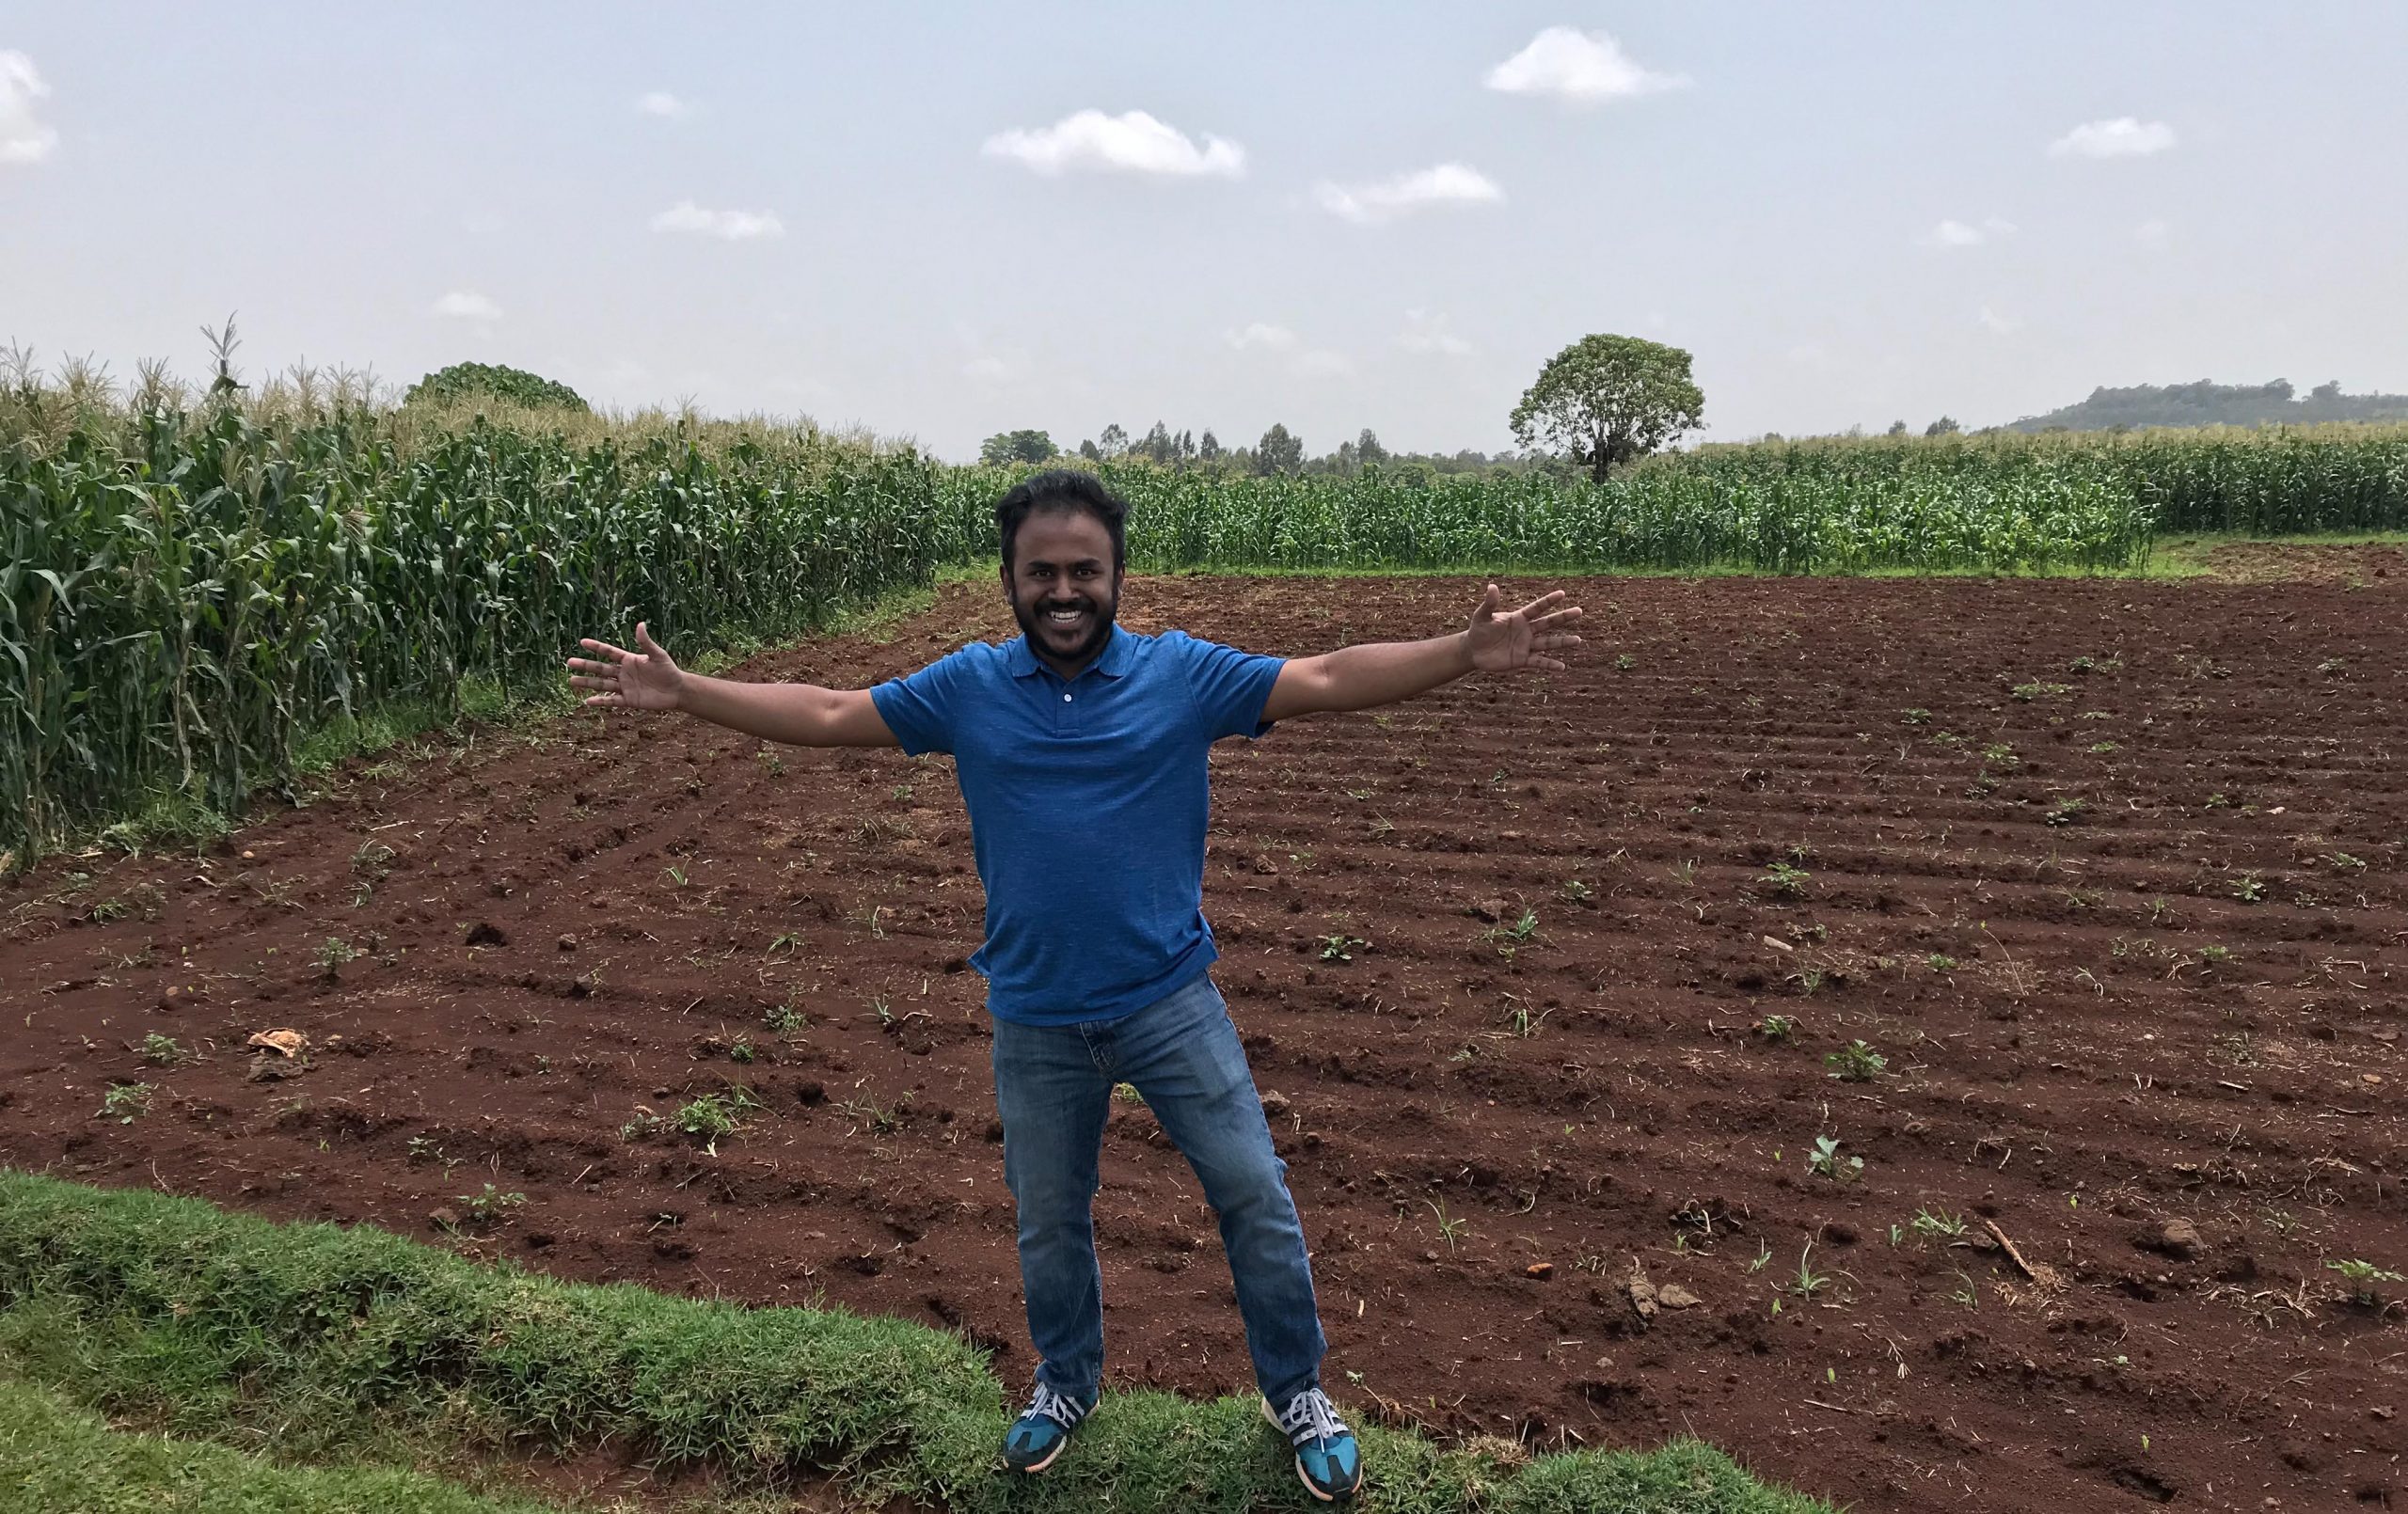 Fahad, a UConn CEE PhD student, on his field trip to Ethiopia in summer 2019.